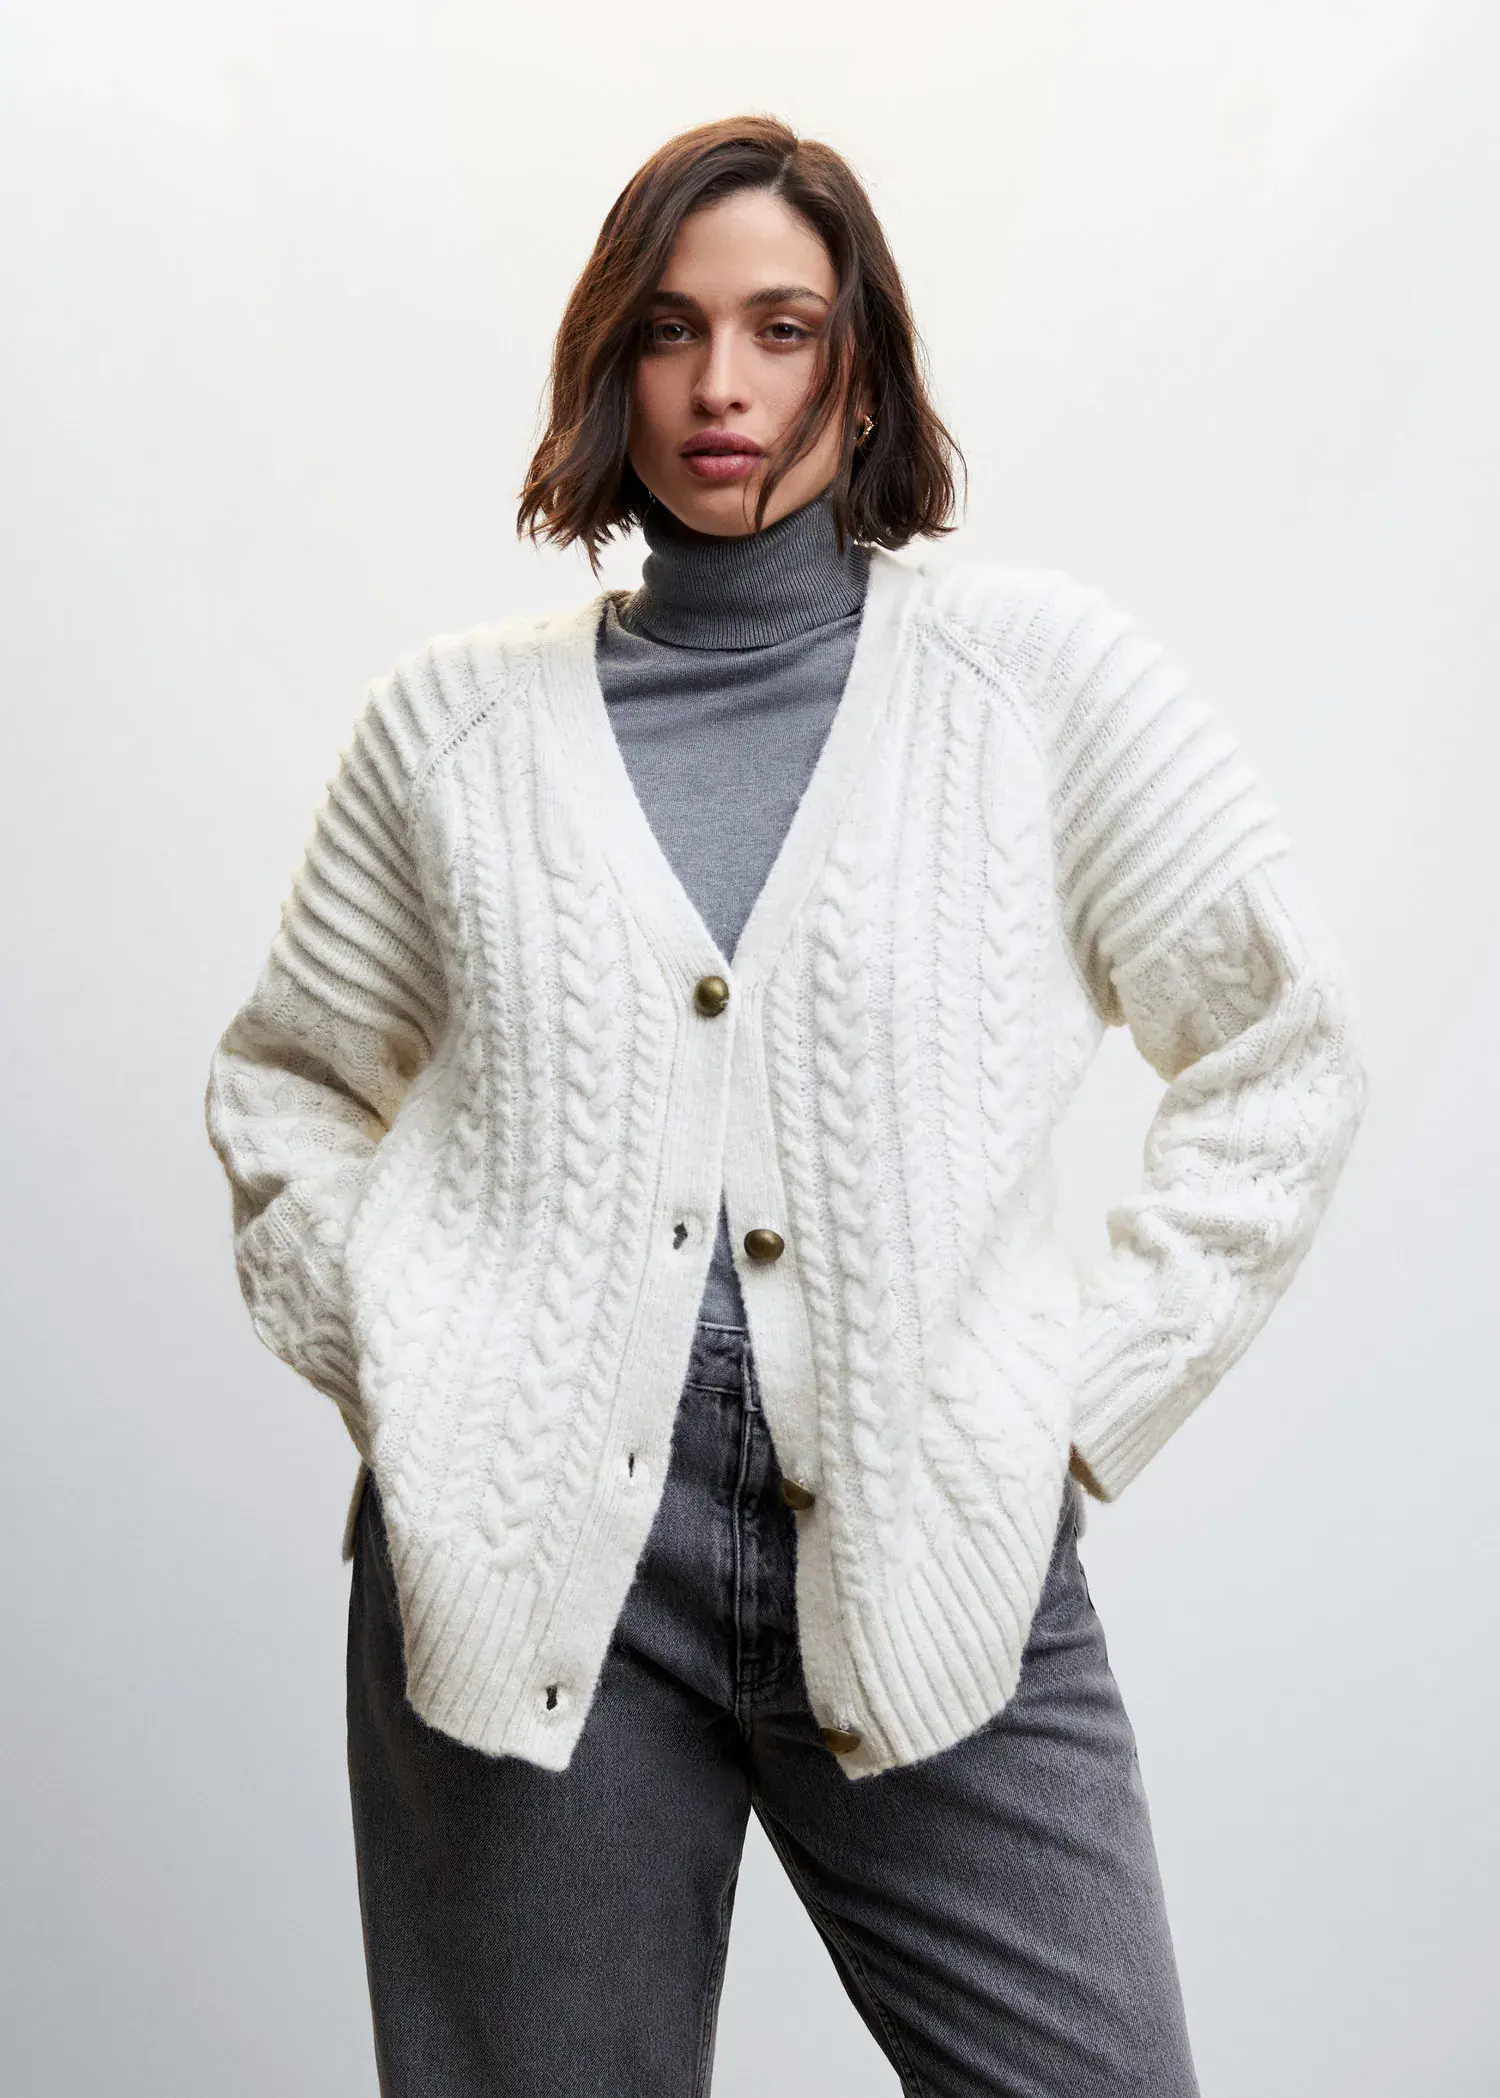 Mango Buttoned knit braided cardigan. a woman wearing a white sweater and jeans. 